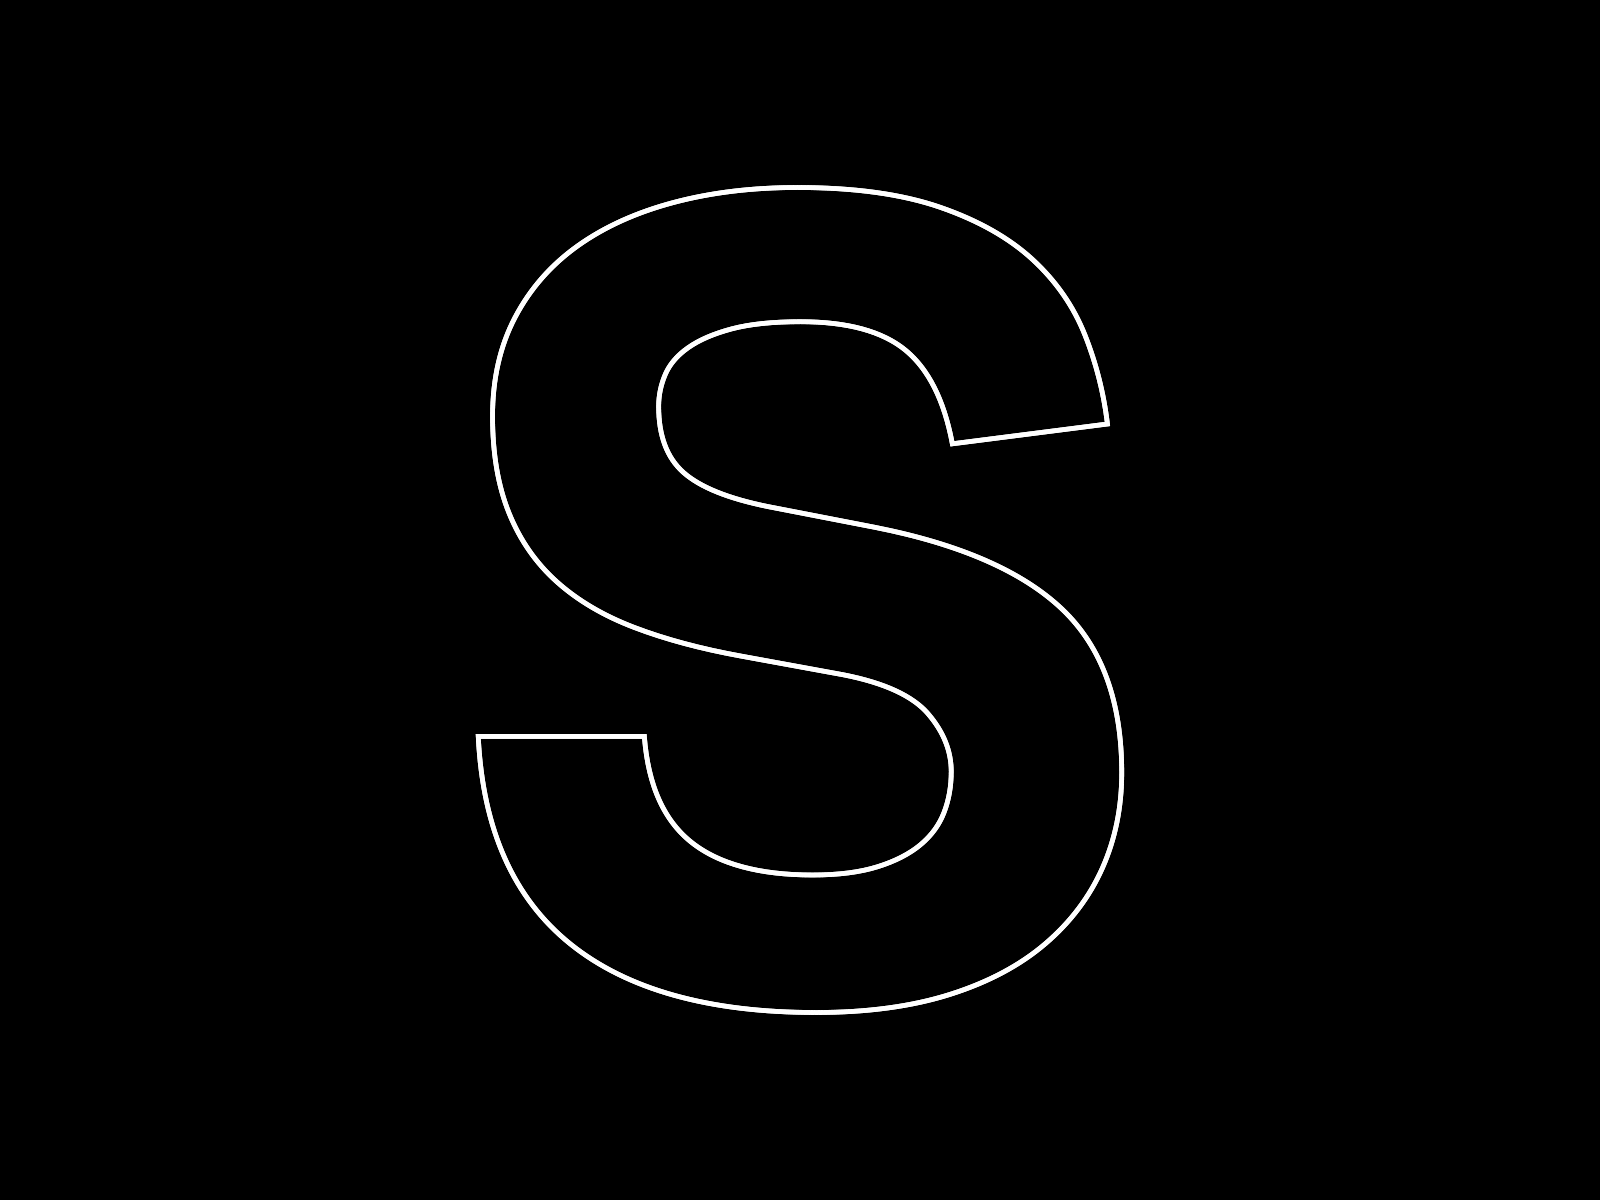 36 Days Of Kinetic Type - S 36 days of type 36daysoftype animation design graphic design kinetic kinetic type motion motion design type design typography